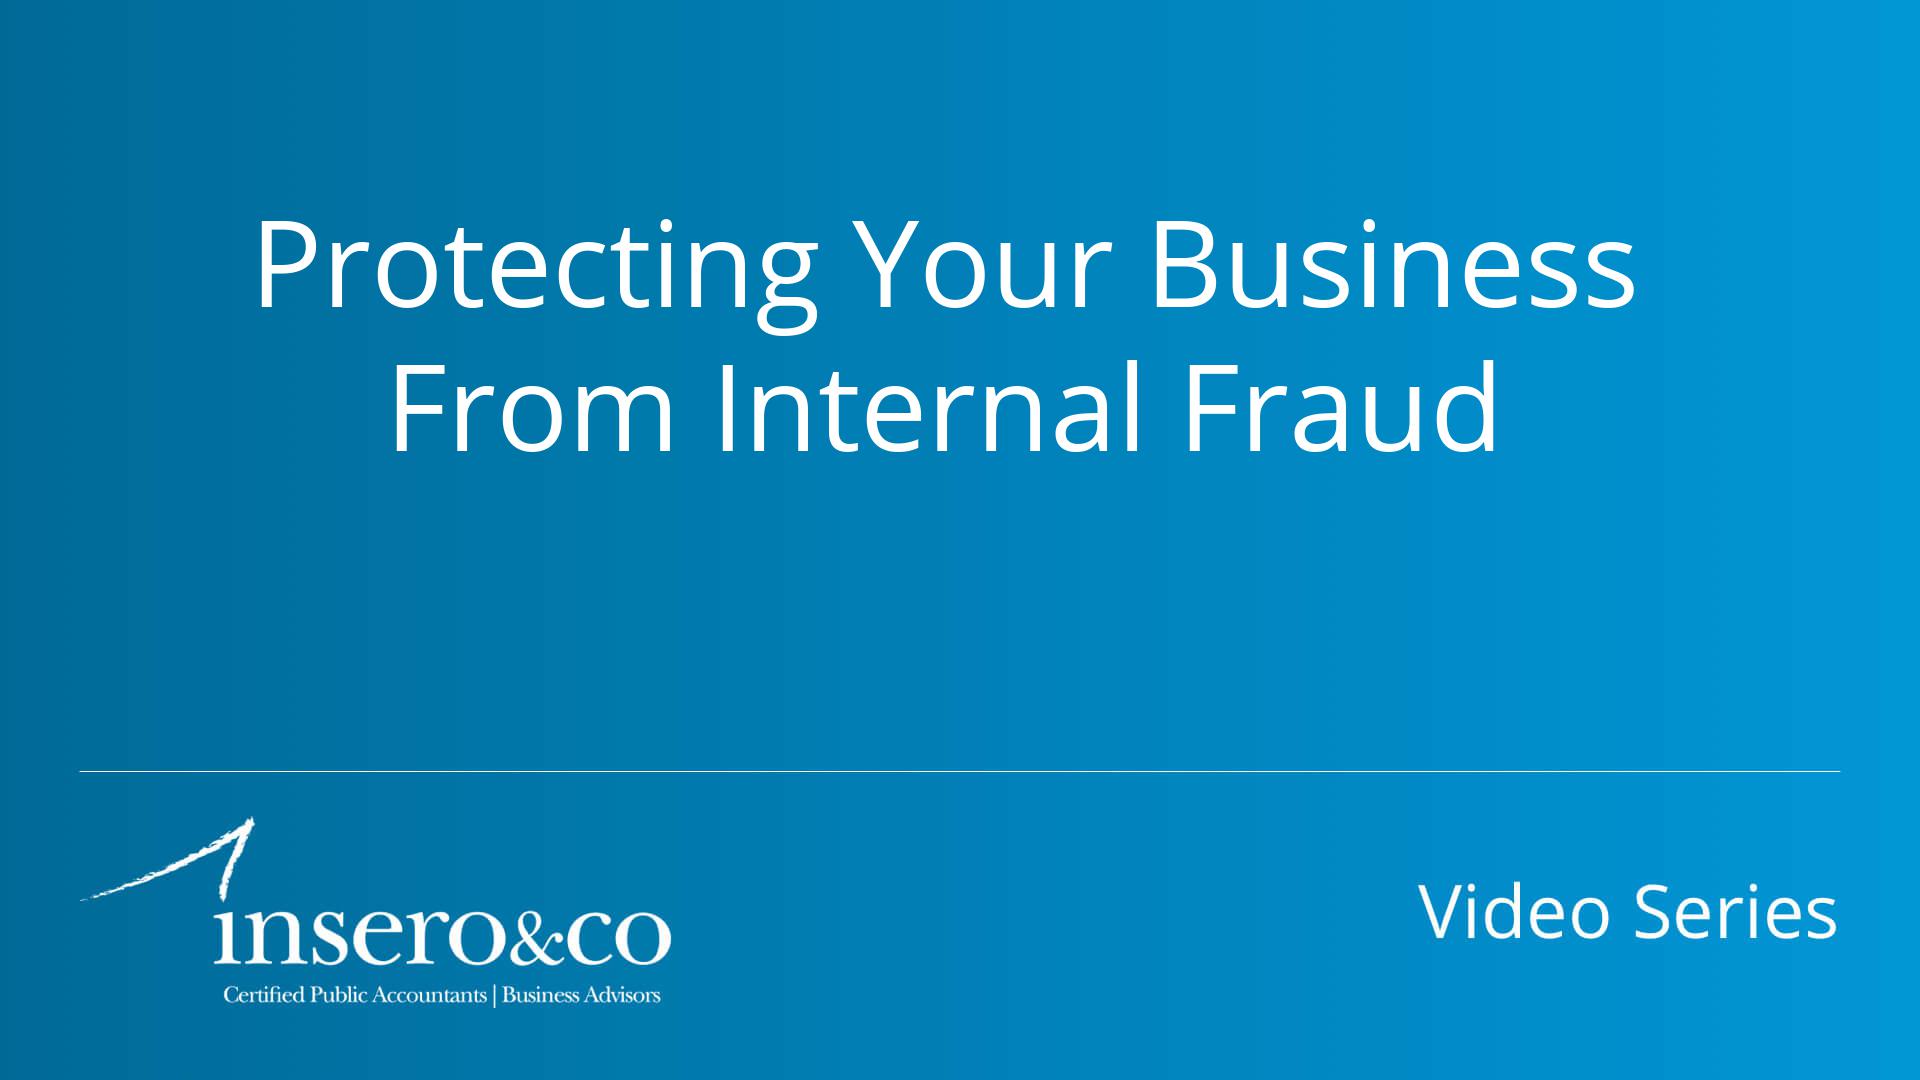 Protecting Your Business From Internal Fraud